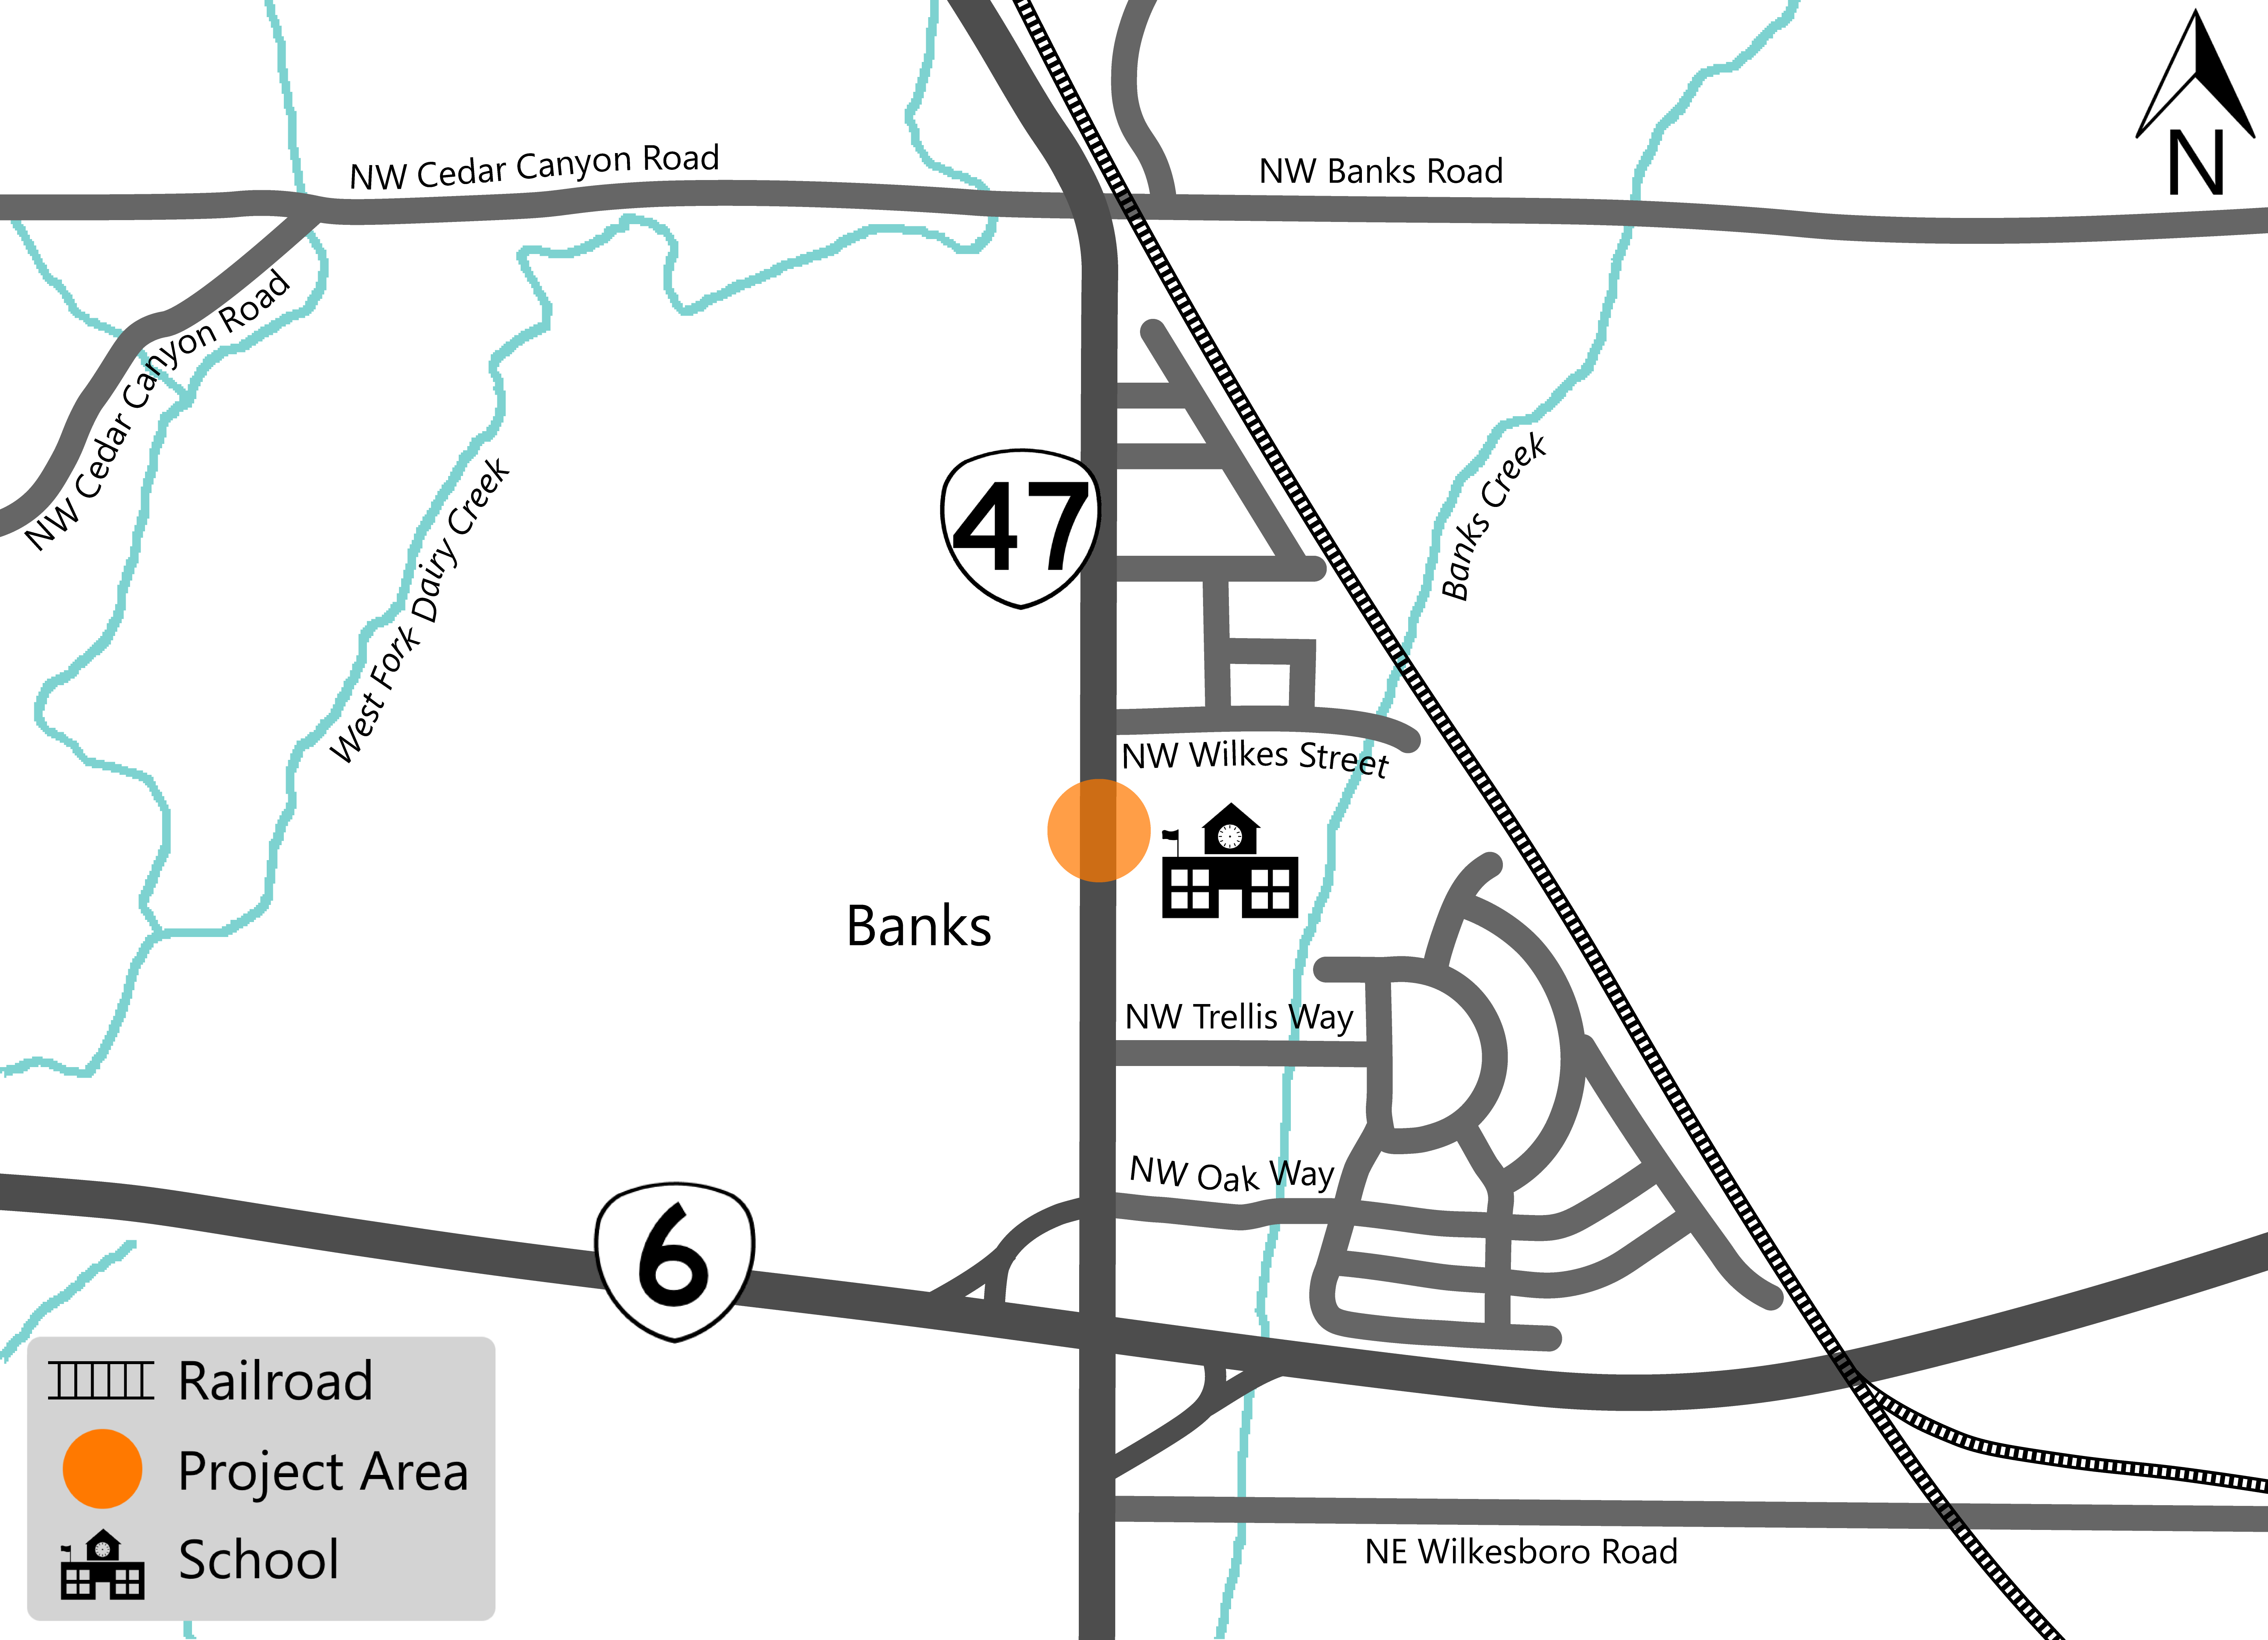 Project Area Map